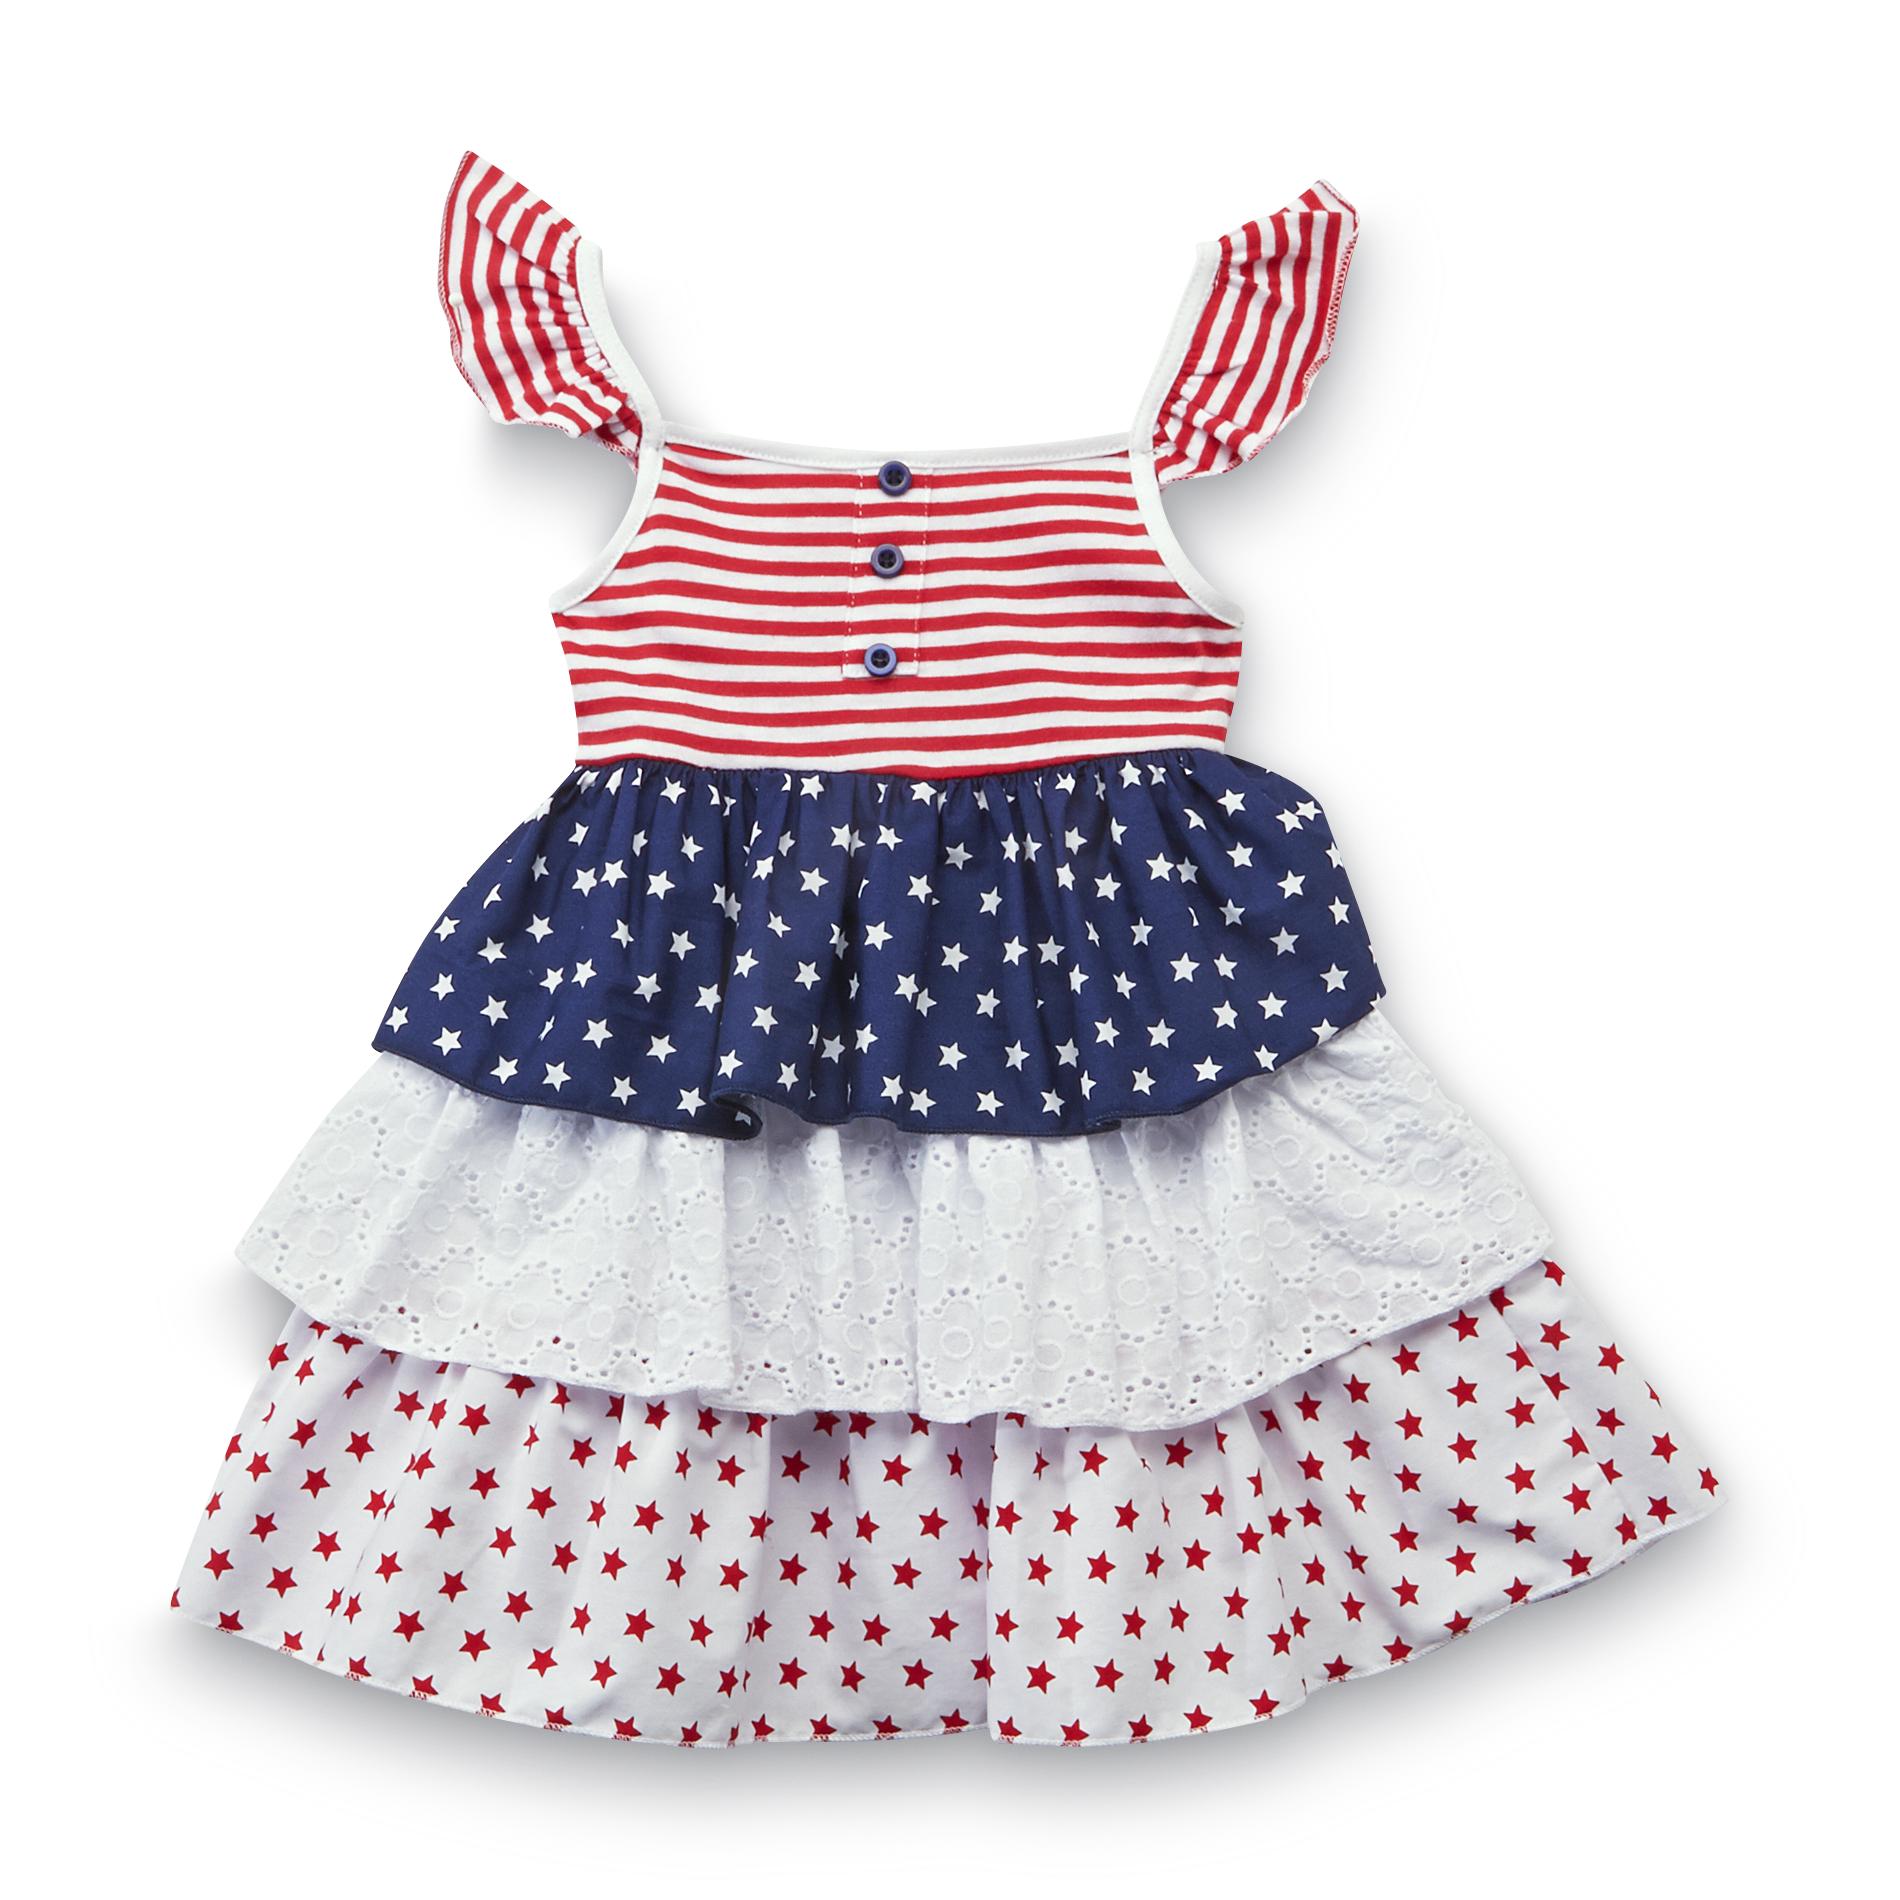 WonderKids Infant & Toddler Girl's Tiered Tunic - Fourth of July